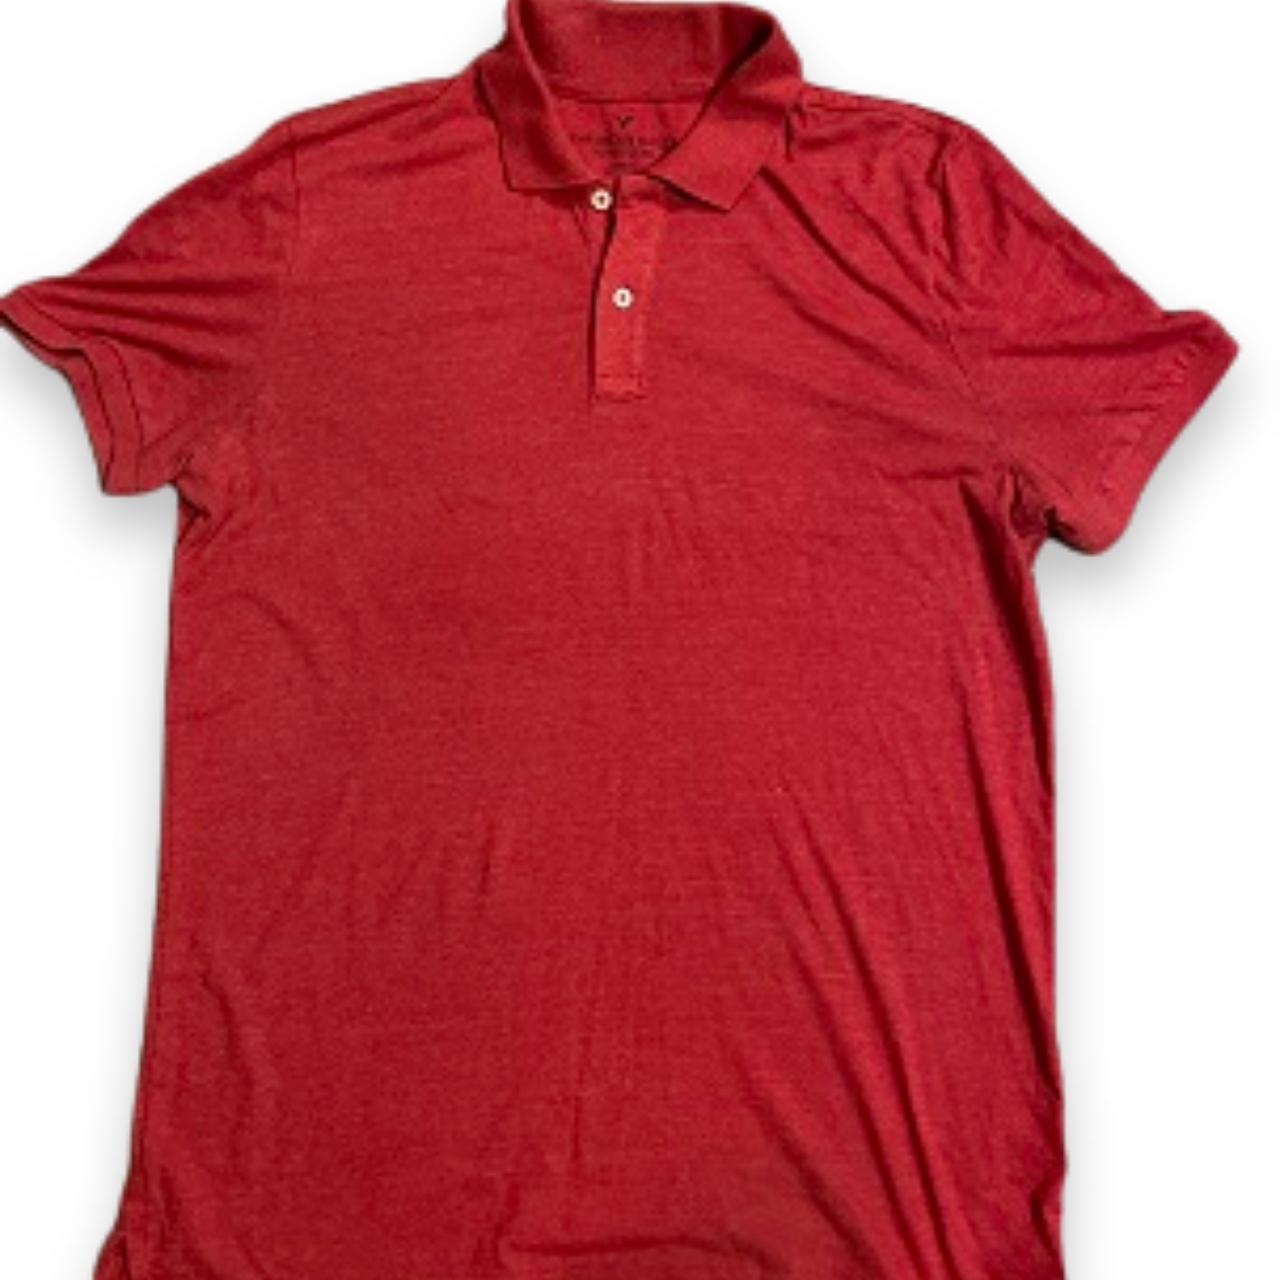 Vintage Mens American eagle outfitters heather red polo shirt size L